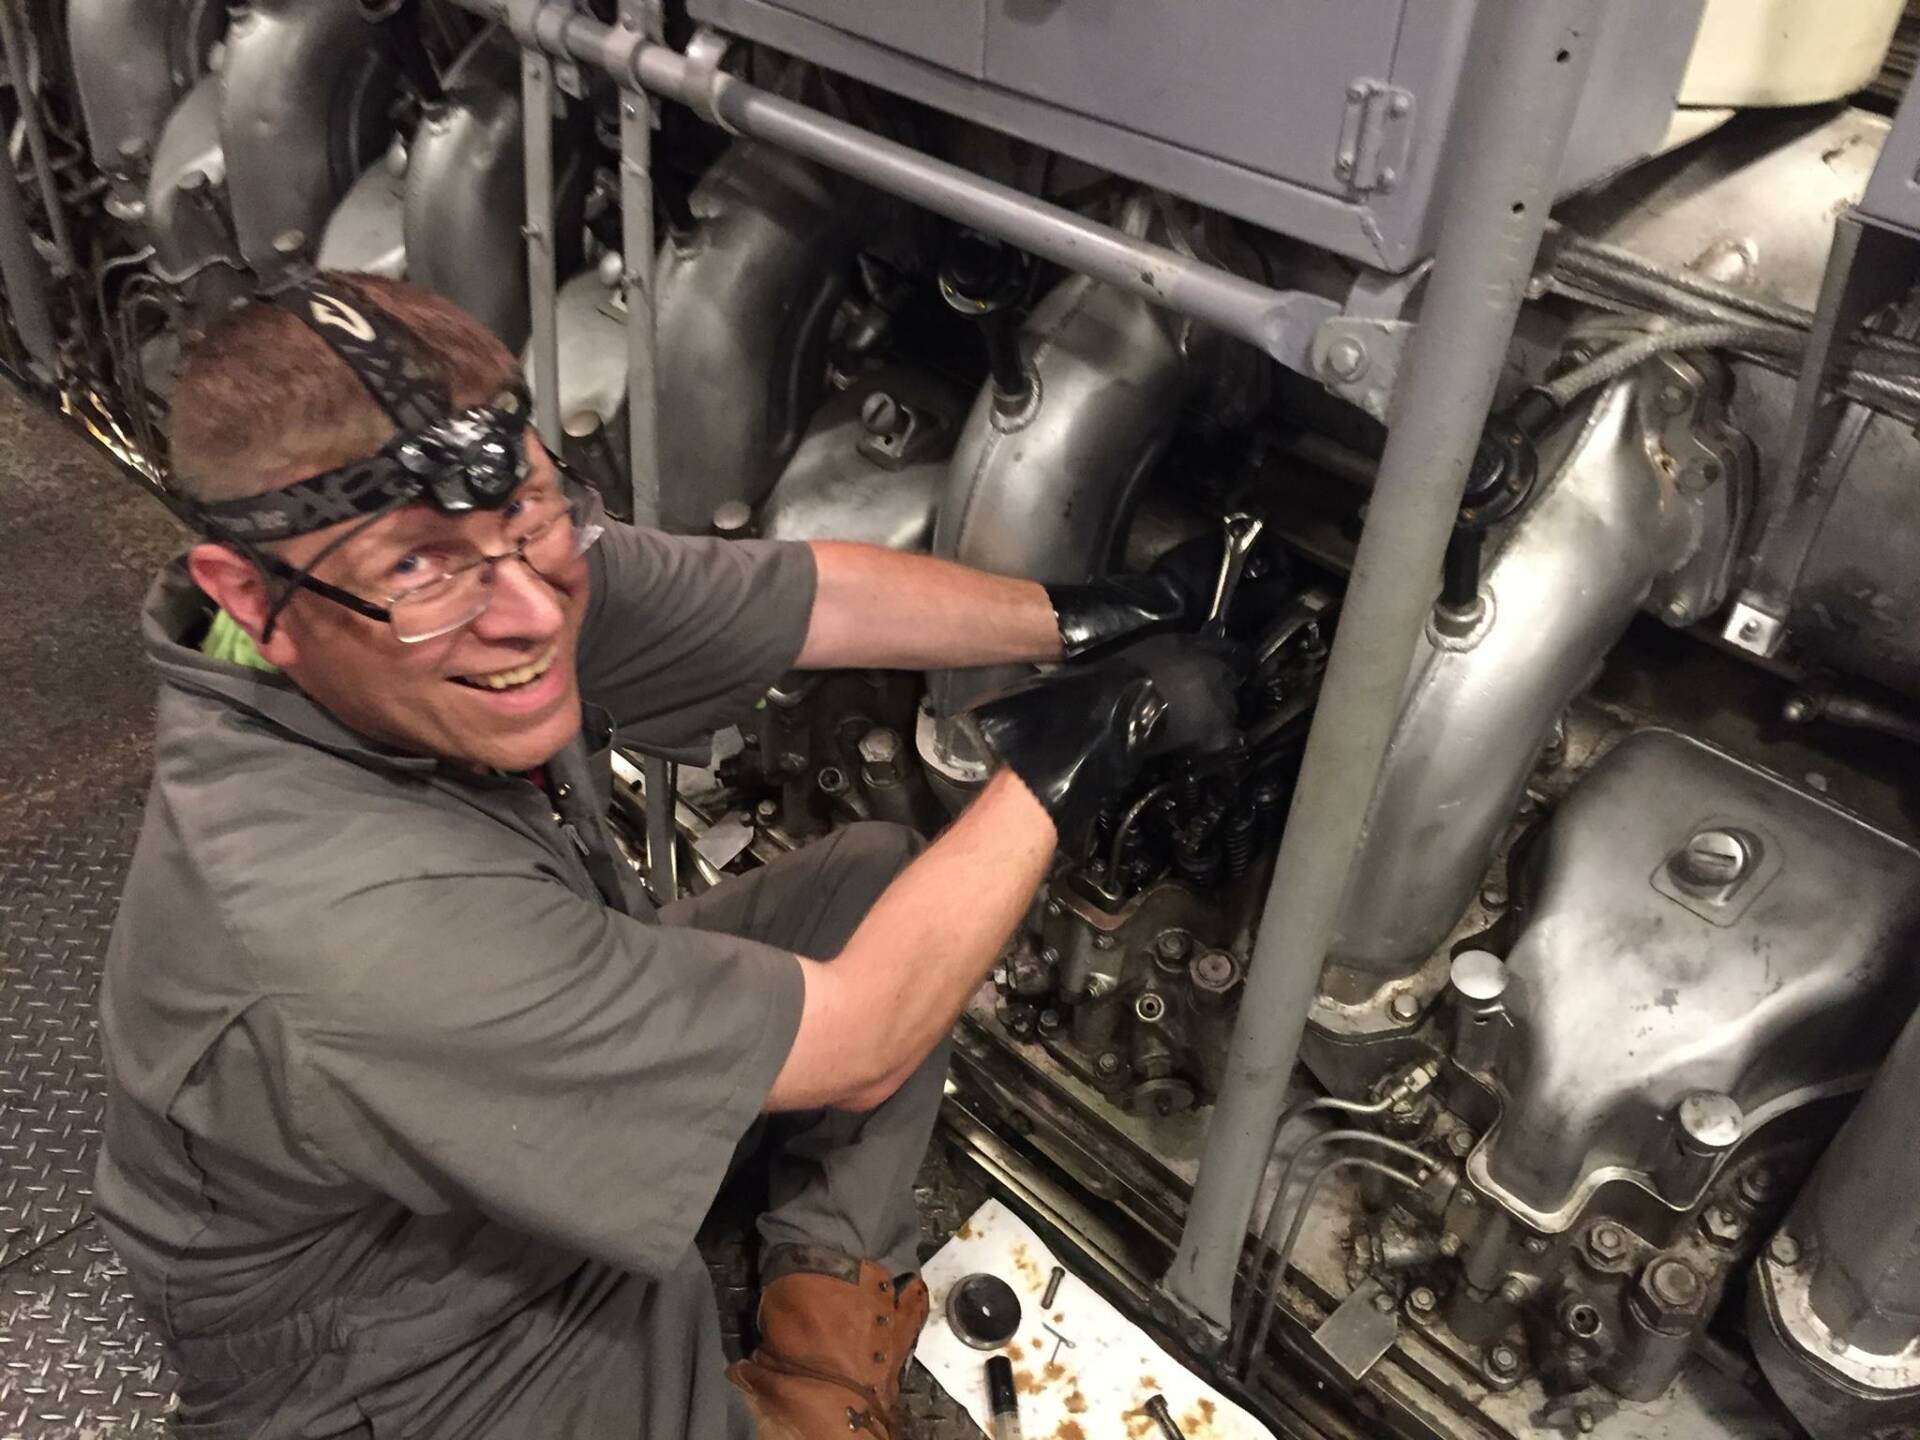 A volunteer working on the sub's engine